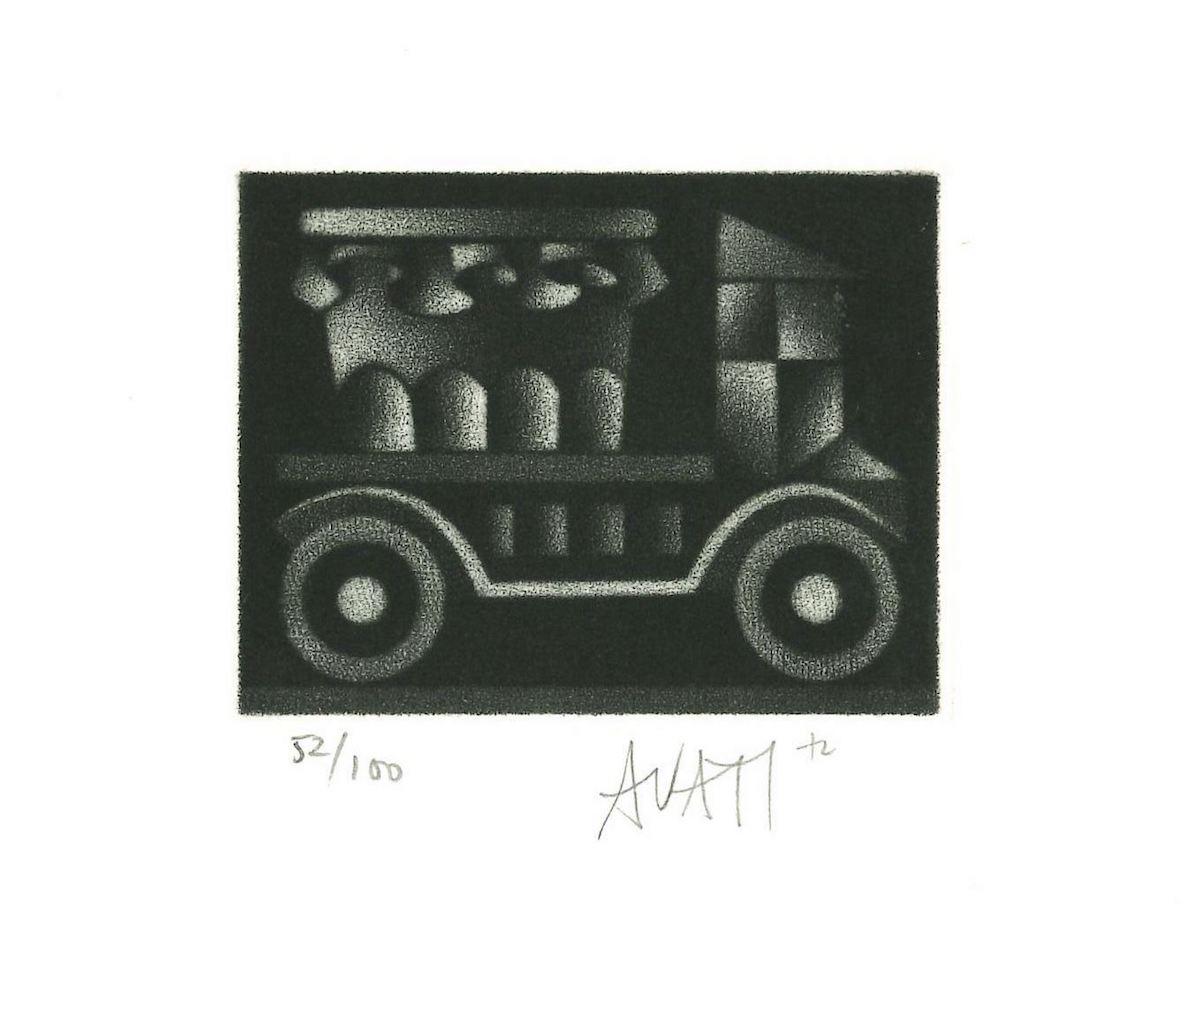 Vehicle is original etching on paper, realized by the French artist and print-maker master Mario Avati (1921-2009).

Hand-signed on the lower right and numbered on the lower left in pencil. Edition of 52/100 prints.

In excellent conditions.

The